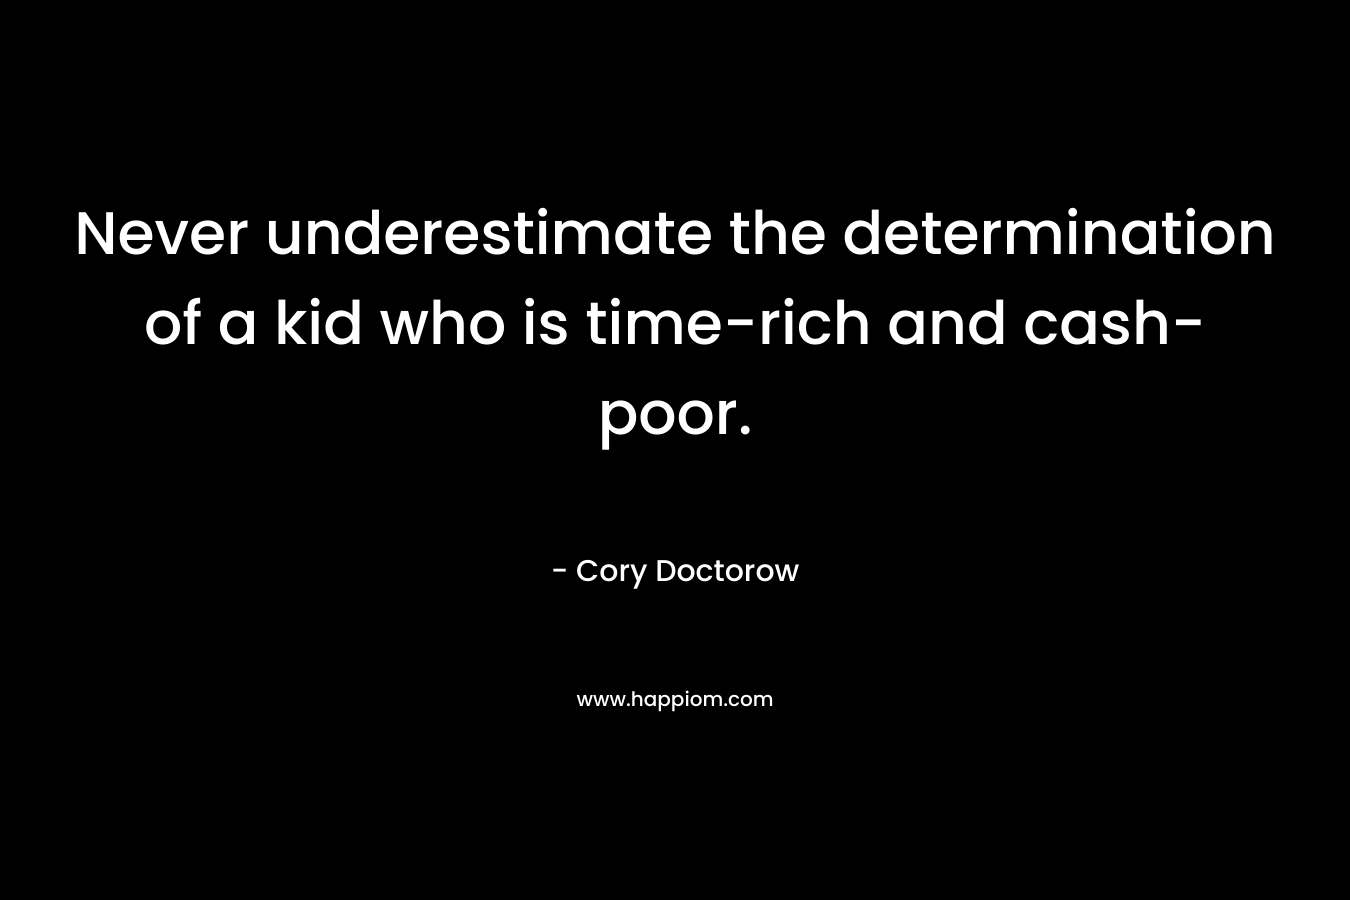 Never underestimate the determination of a kid who is time-rich and cash-poor.